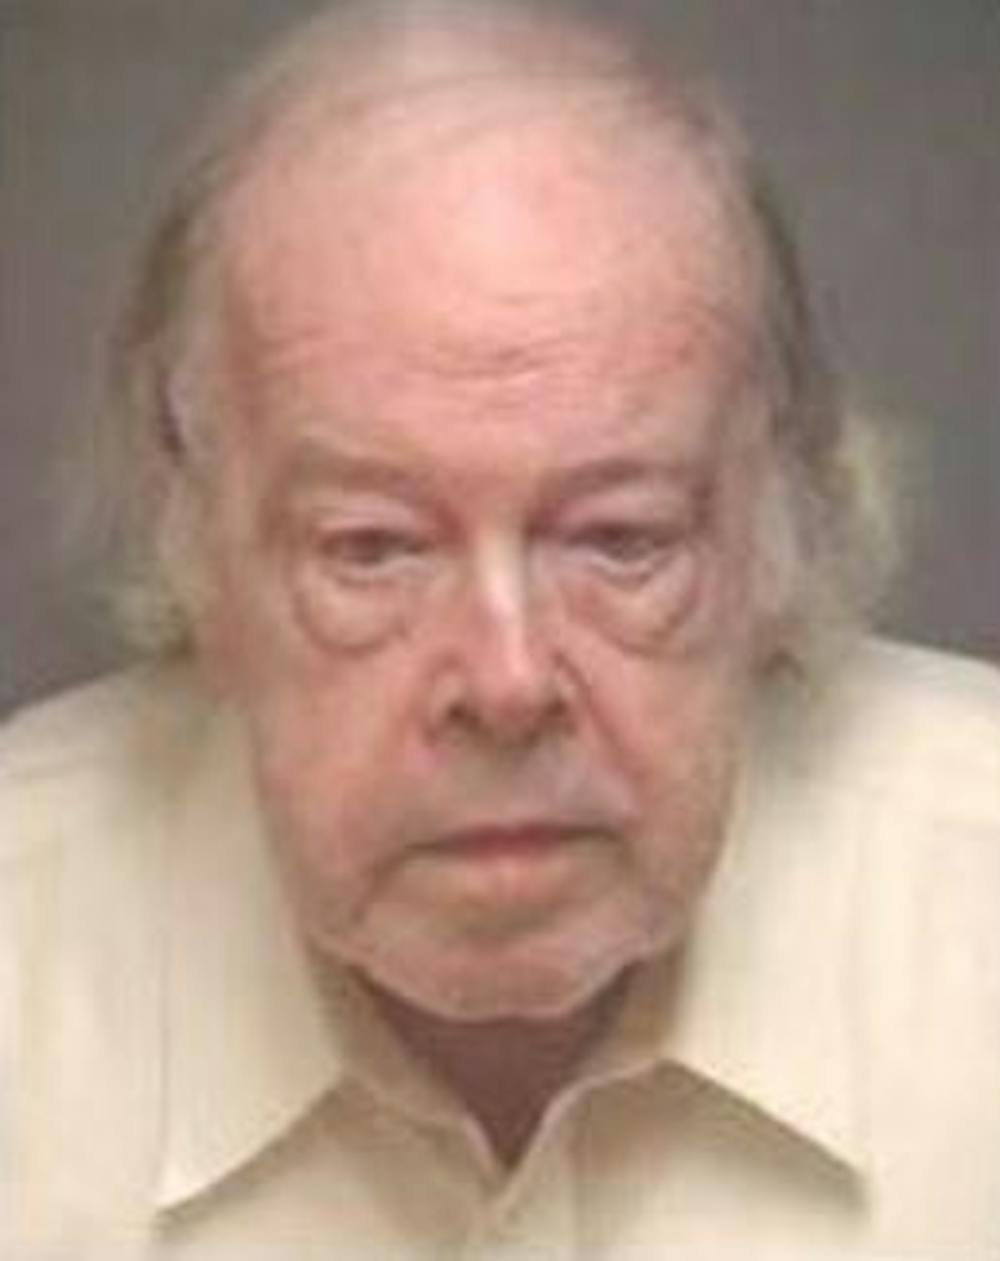 <p>Former University Prof. Walter Francis Korte Jr. pleaded guilty to two counts of possession of child pornography Monday morning.</p>